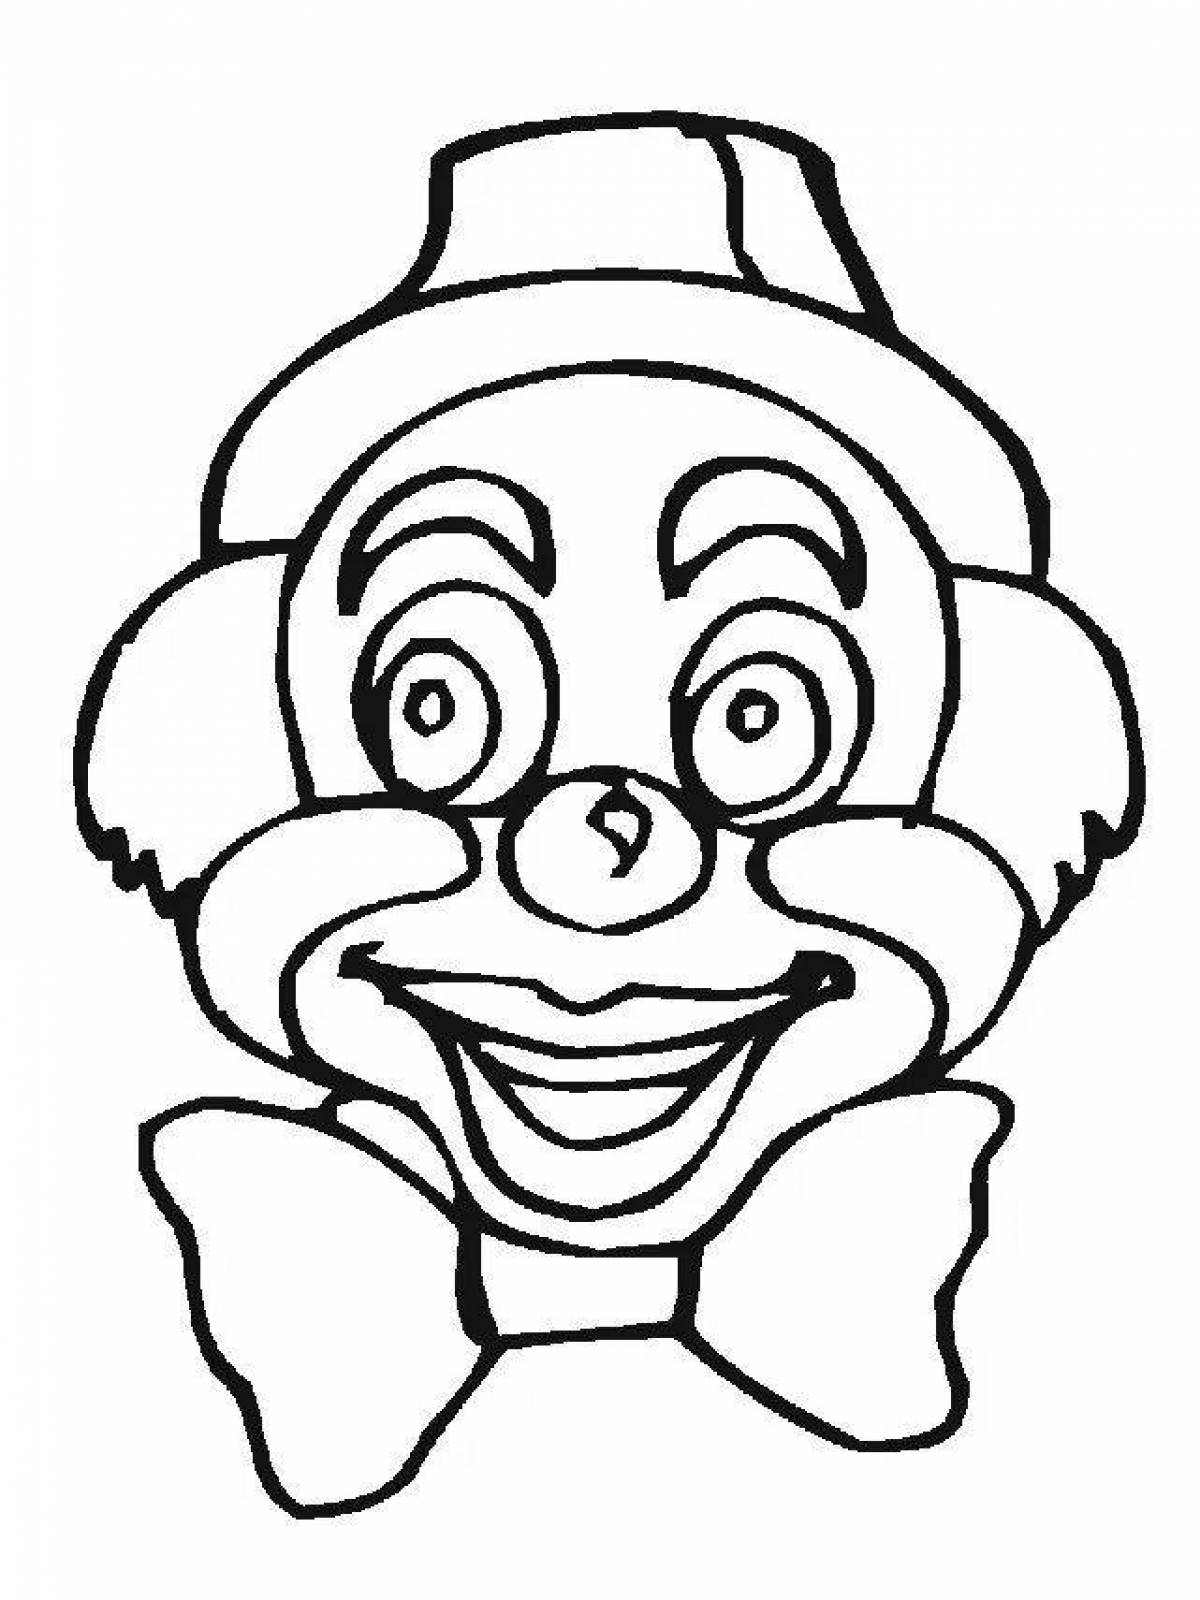 Glitter clown face coloring page